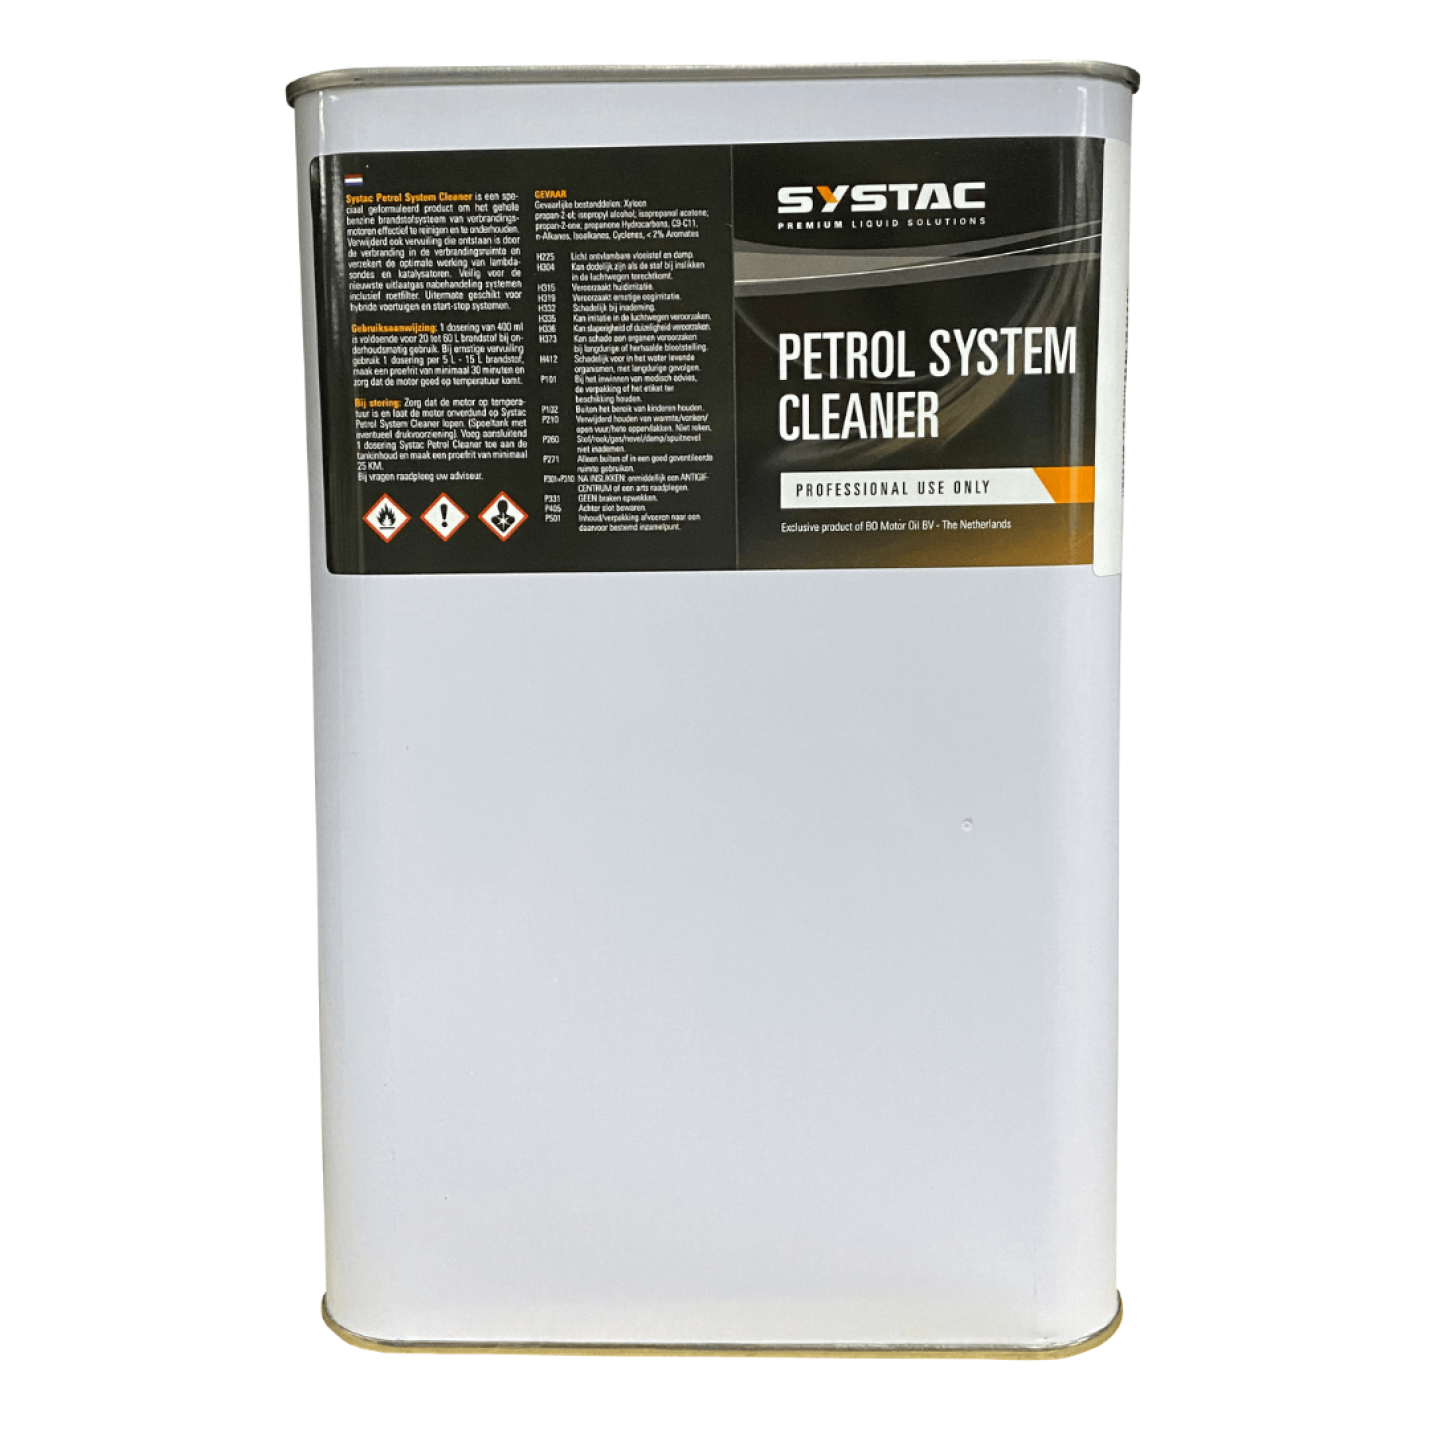 Brandstofadditief Systac Petrol System Cleaner (4L) AE-trading